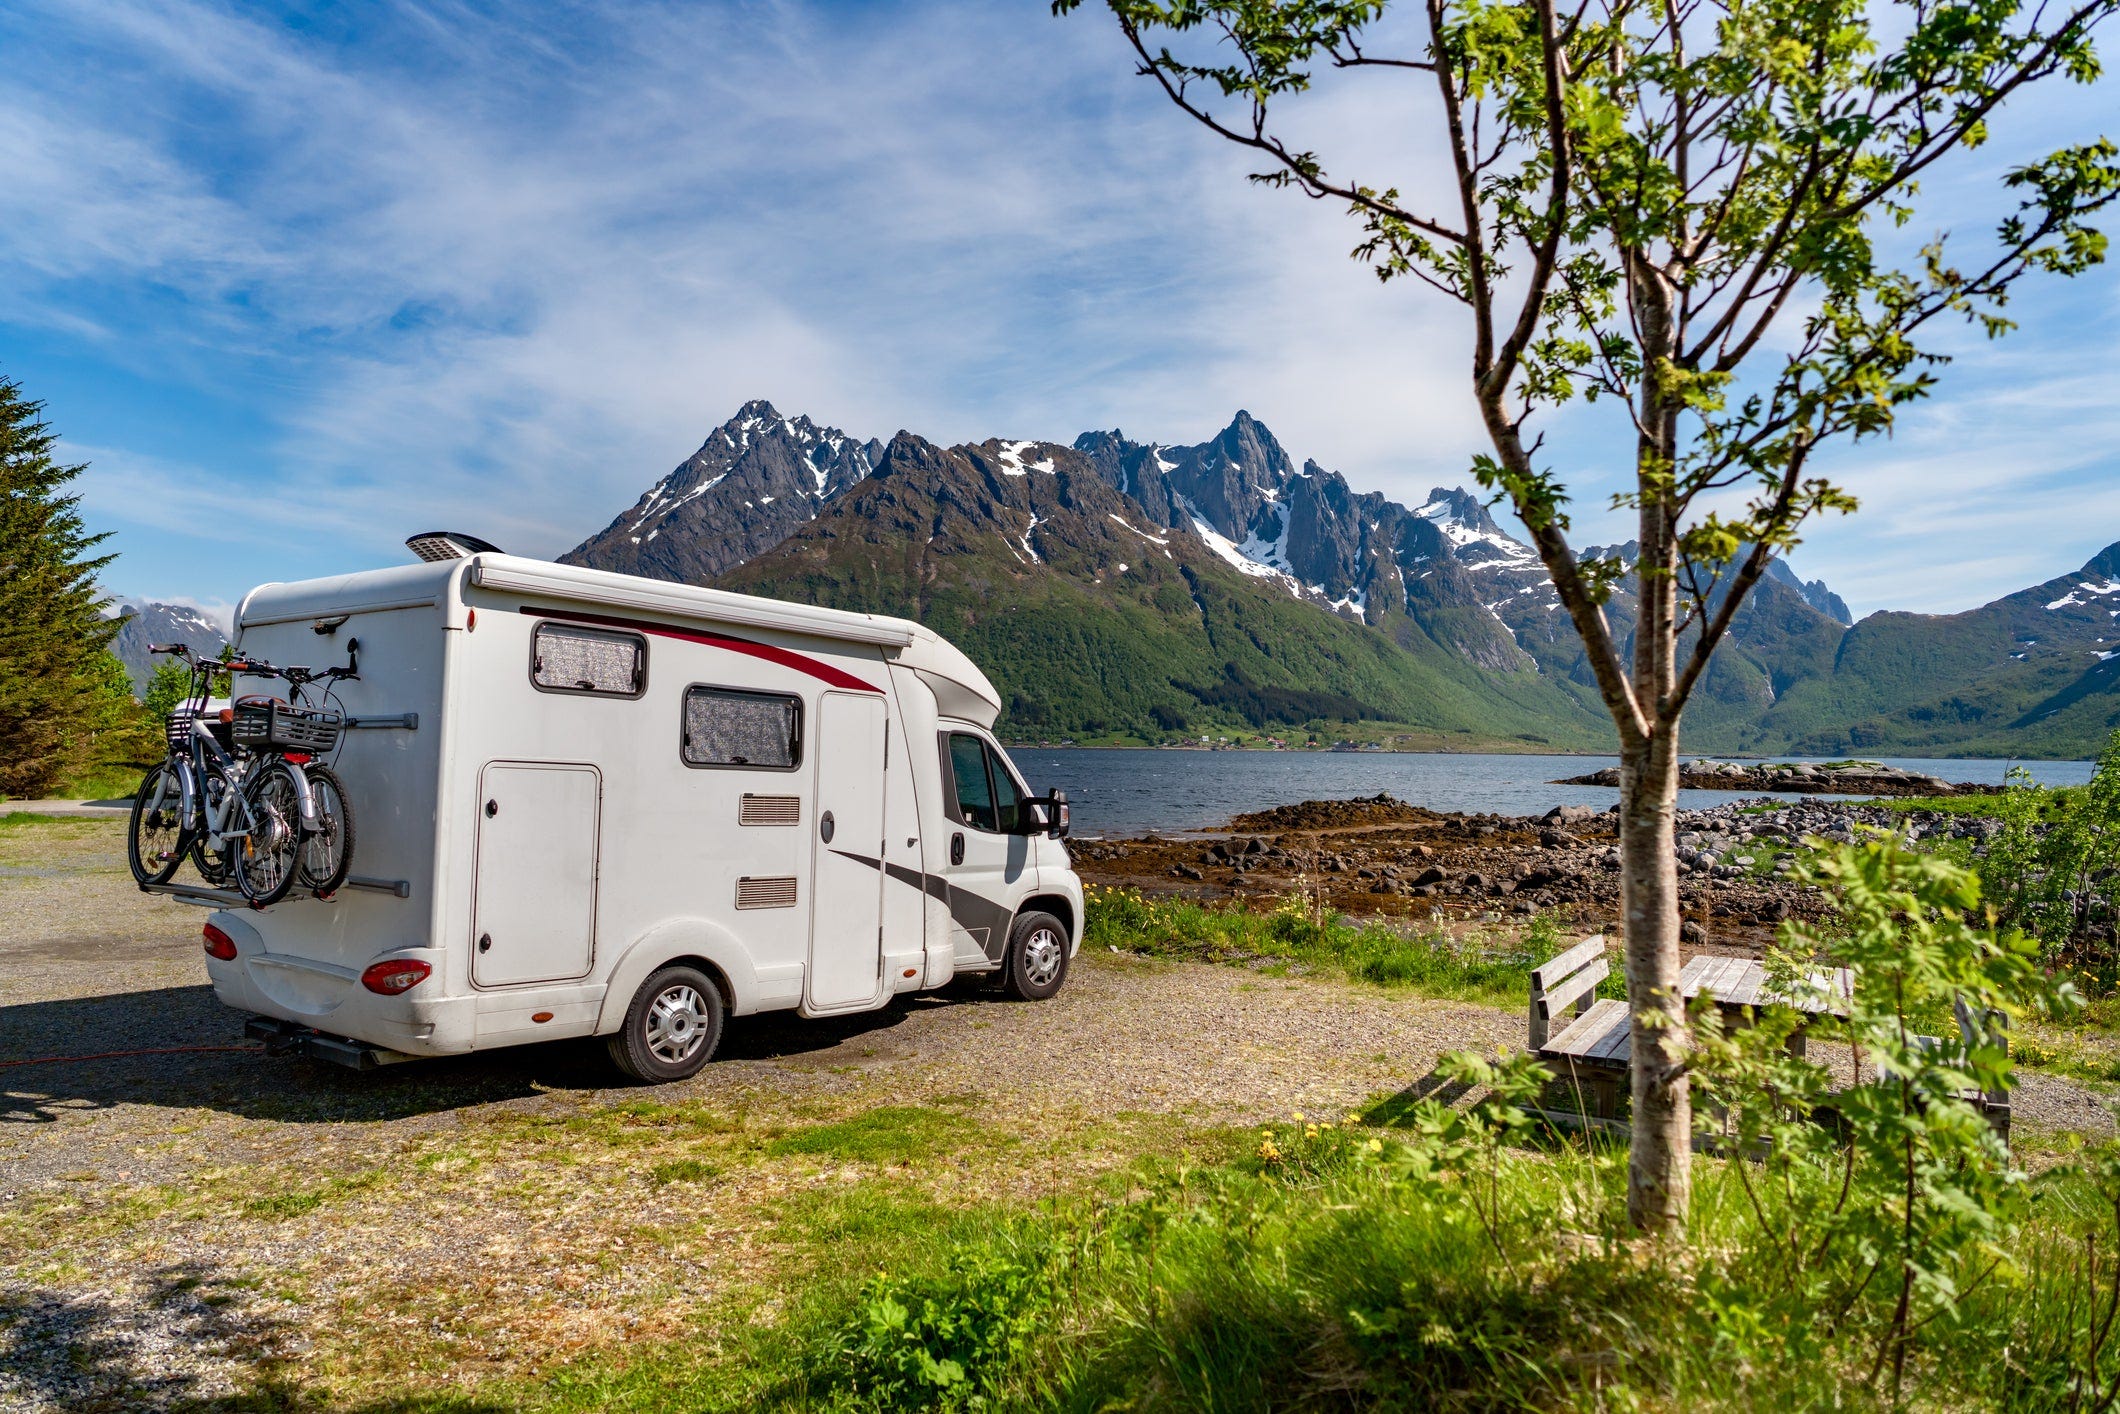 RV rentals rise as Americans prepare for Fourth of July road trips